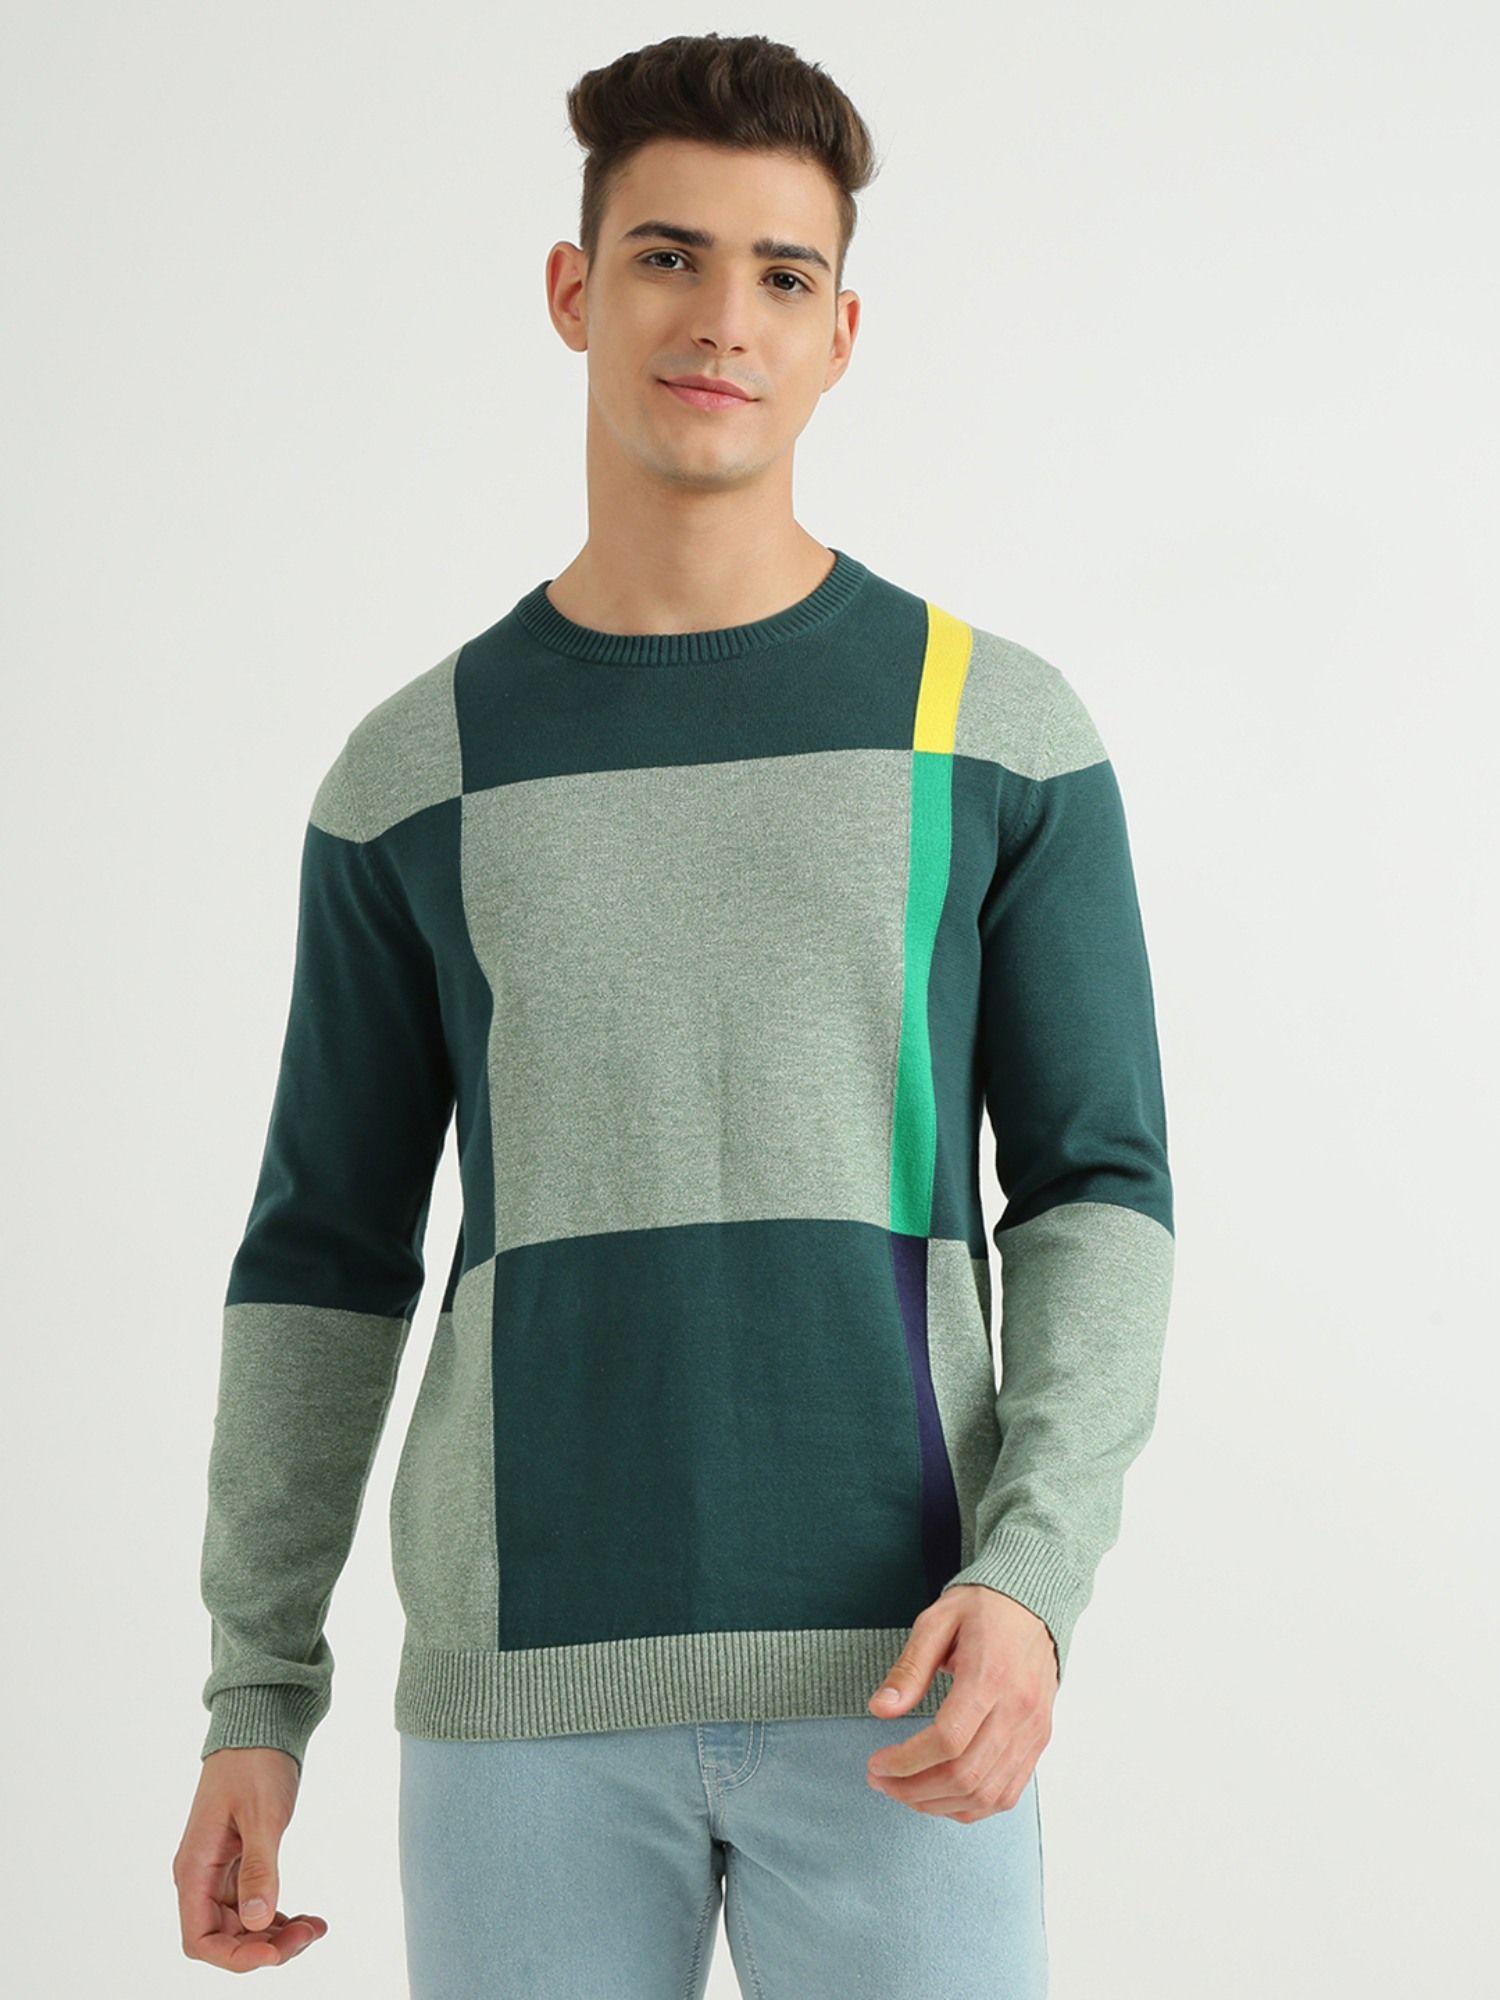 mens long sleeve check sweater